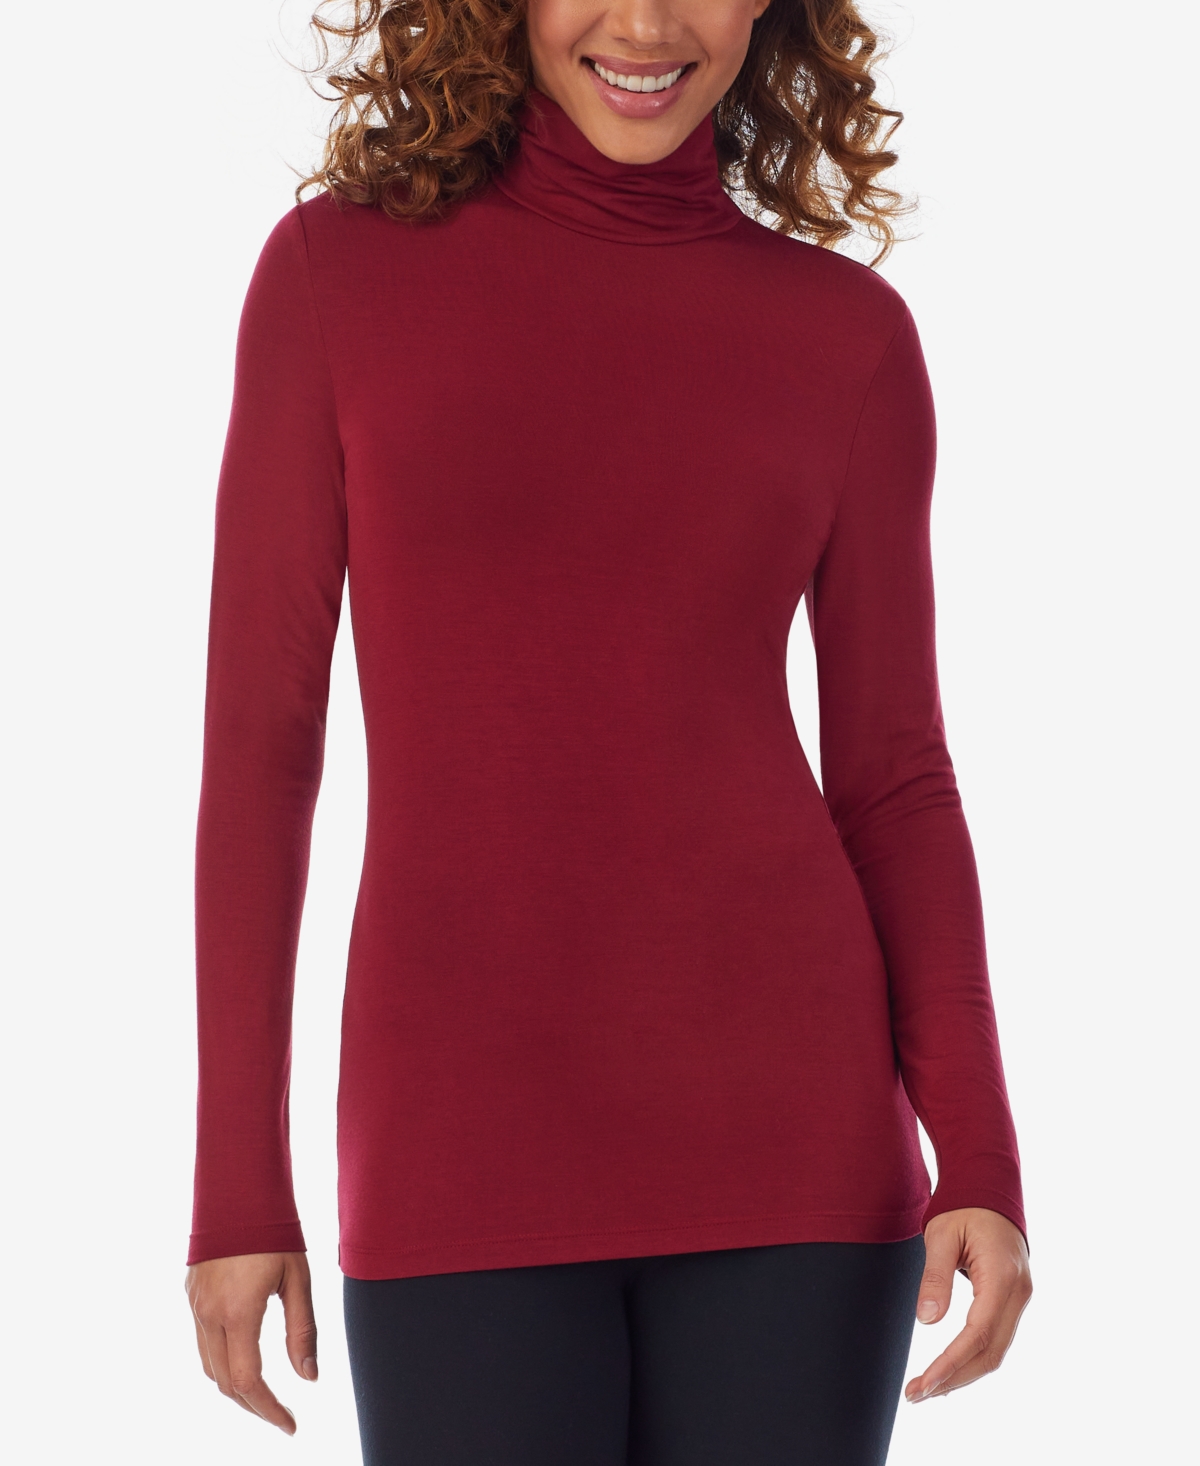 Cuddl Duds Women's Softwear With Stretch Long Sleeve V Neck Top In